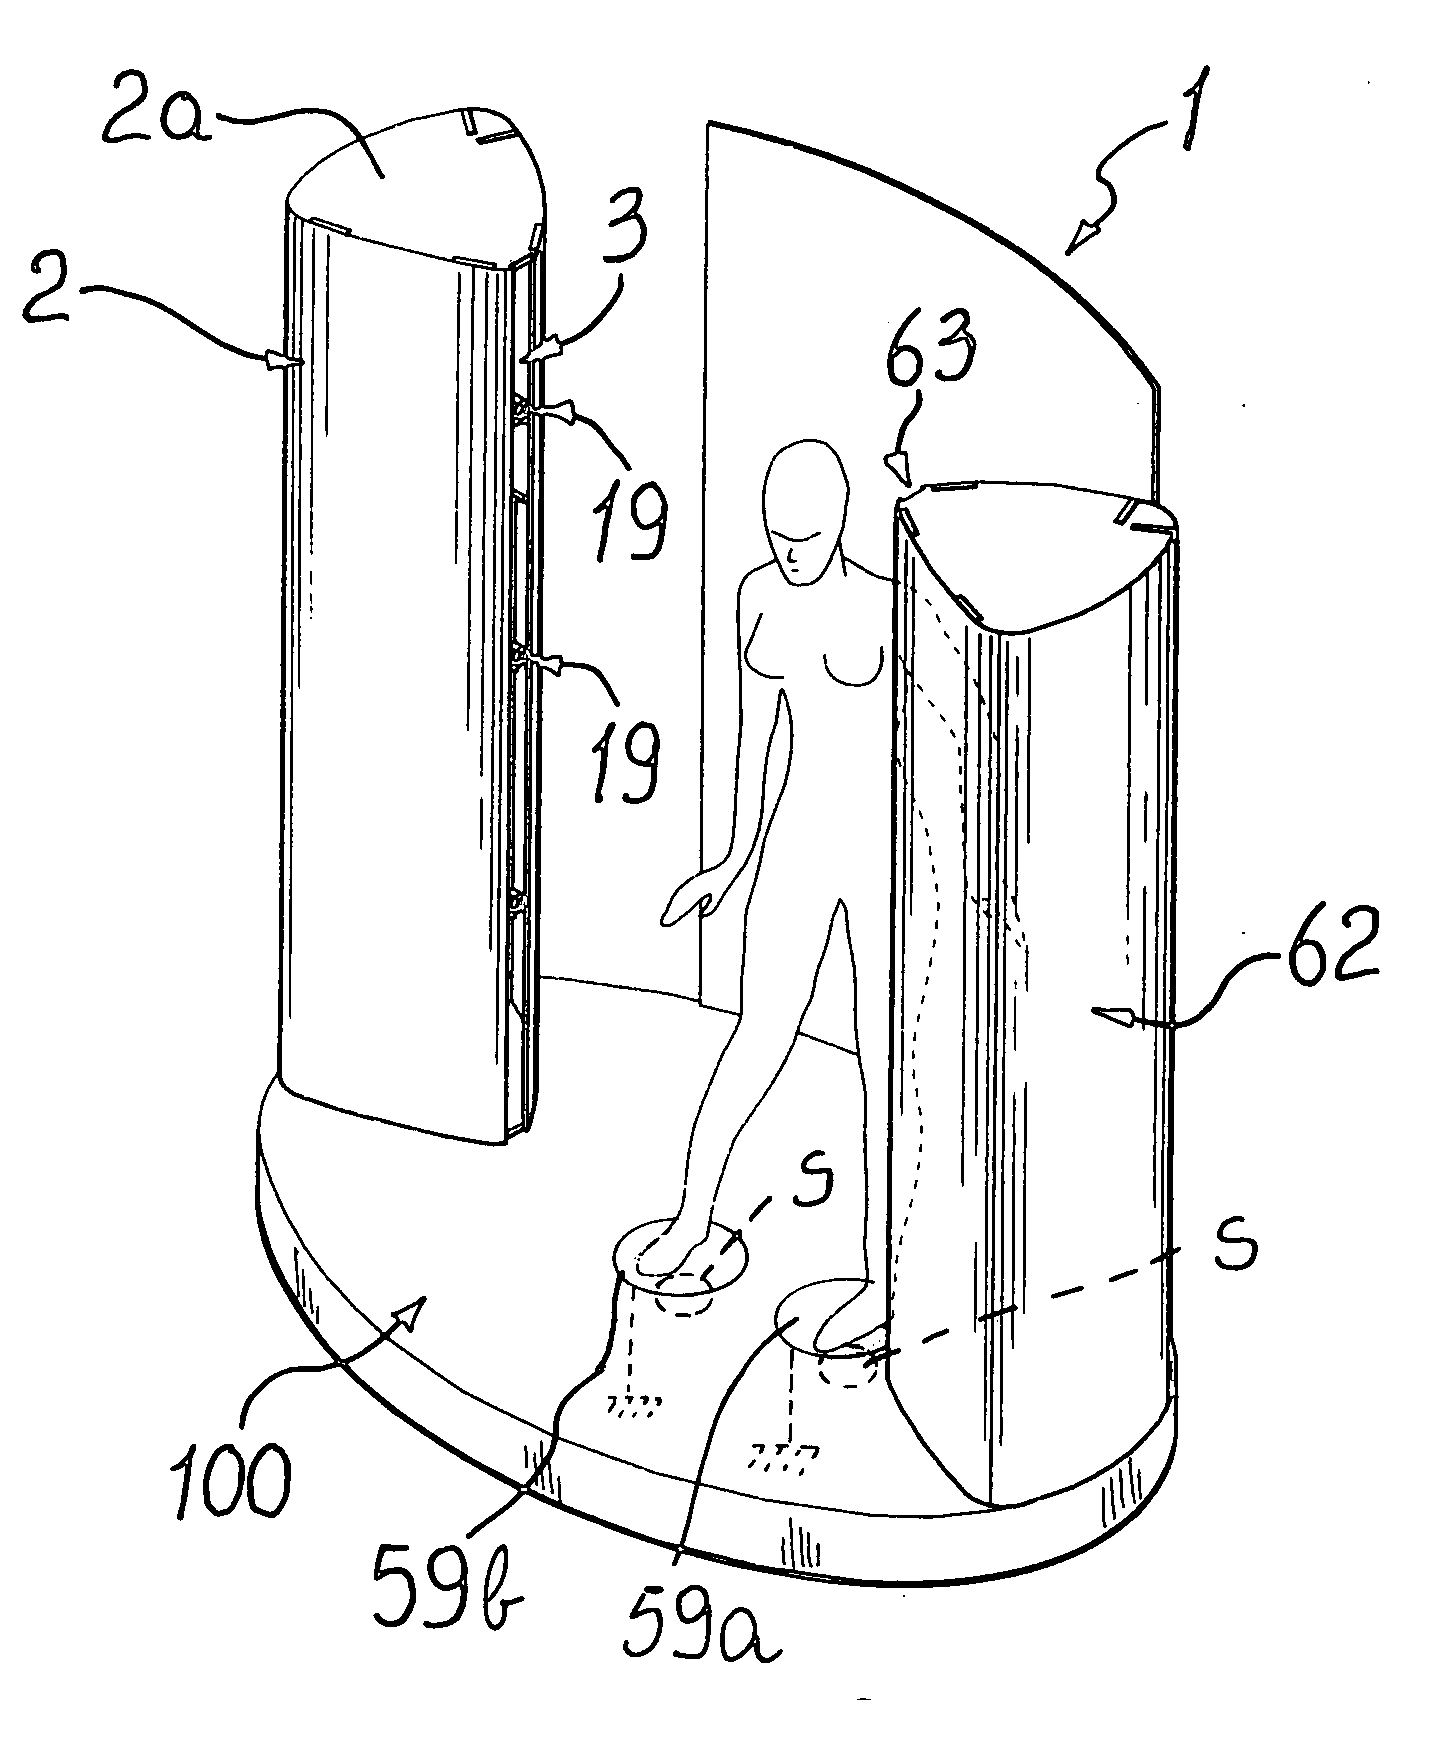 Device for applying a cosmetic product to the human body